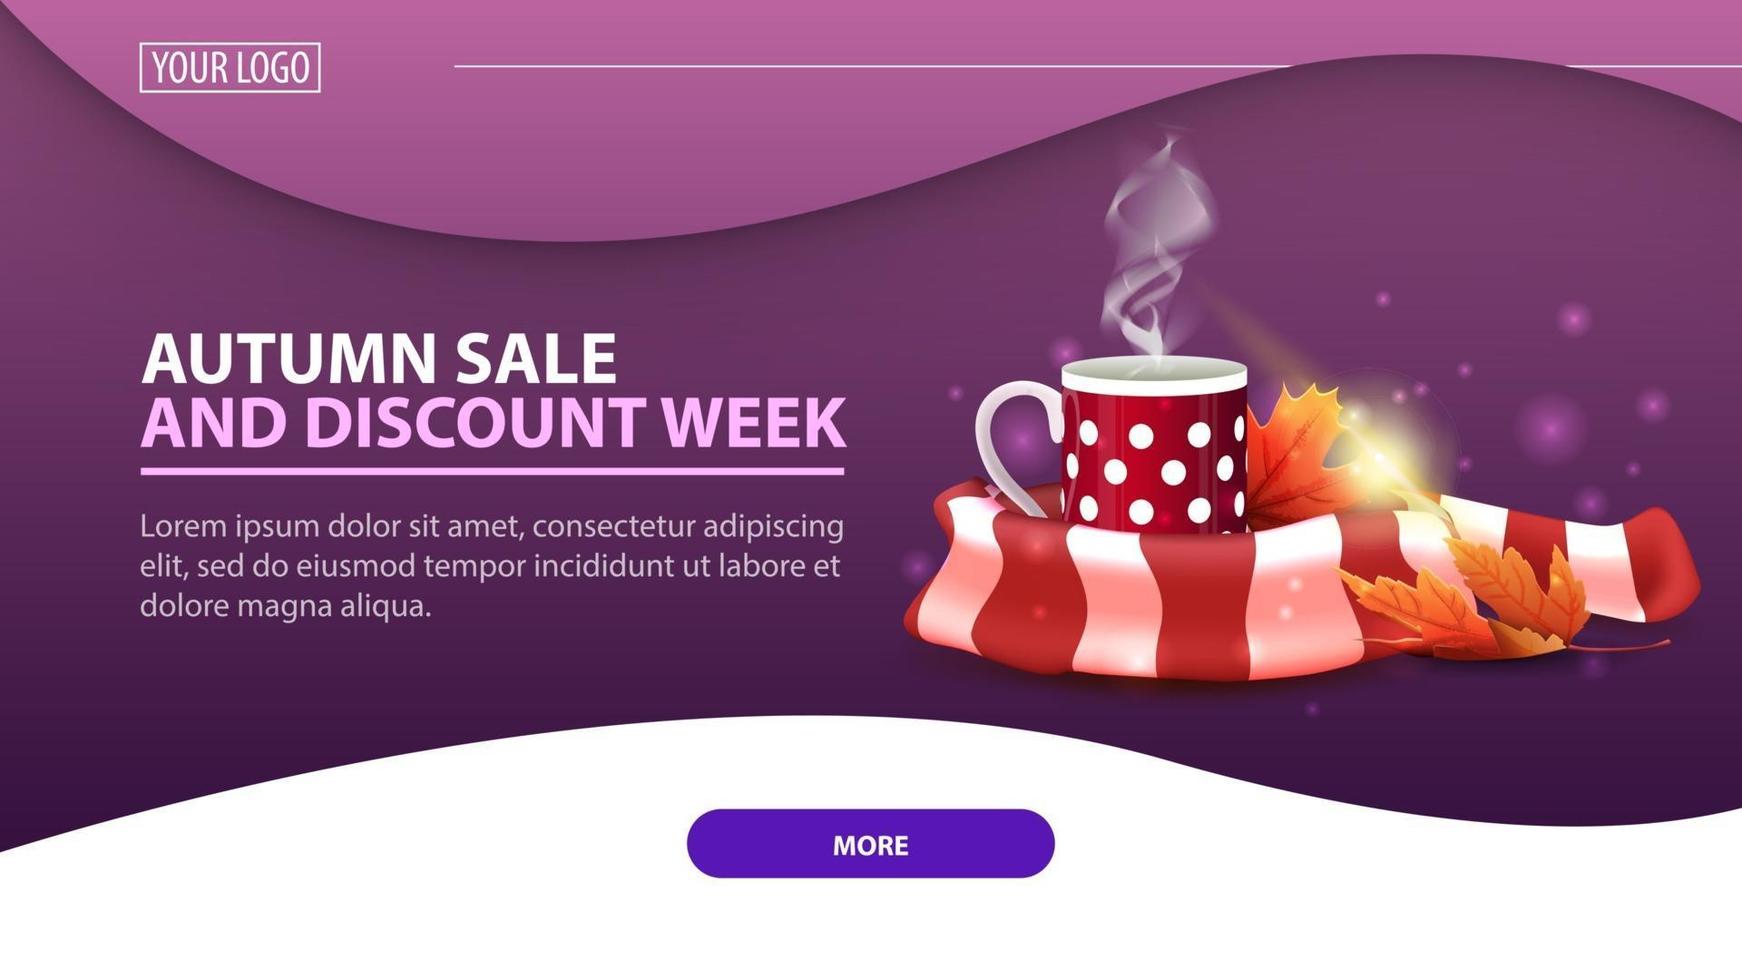 Autumn sale and discount week, banner for the site with mug of hot tea vector